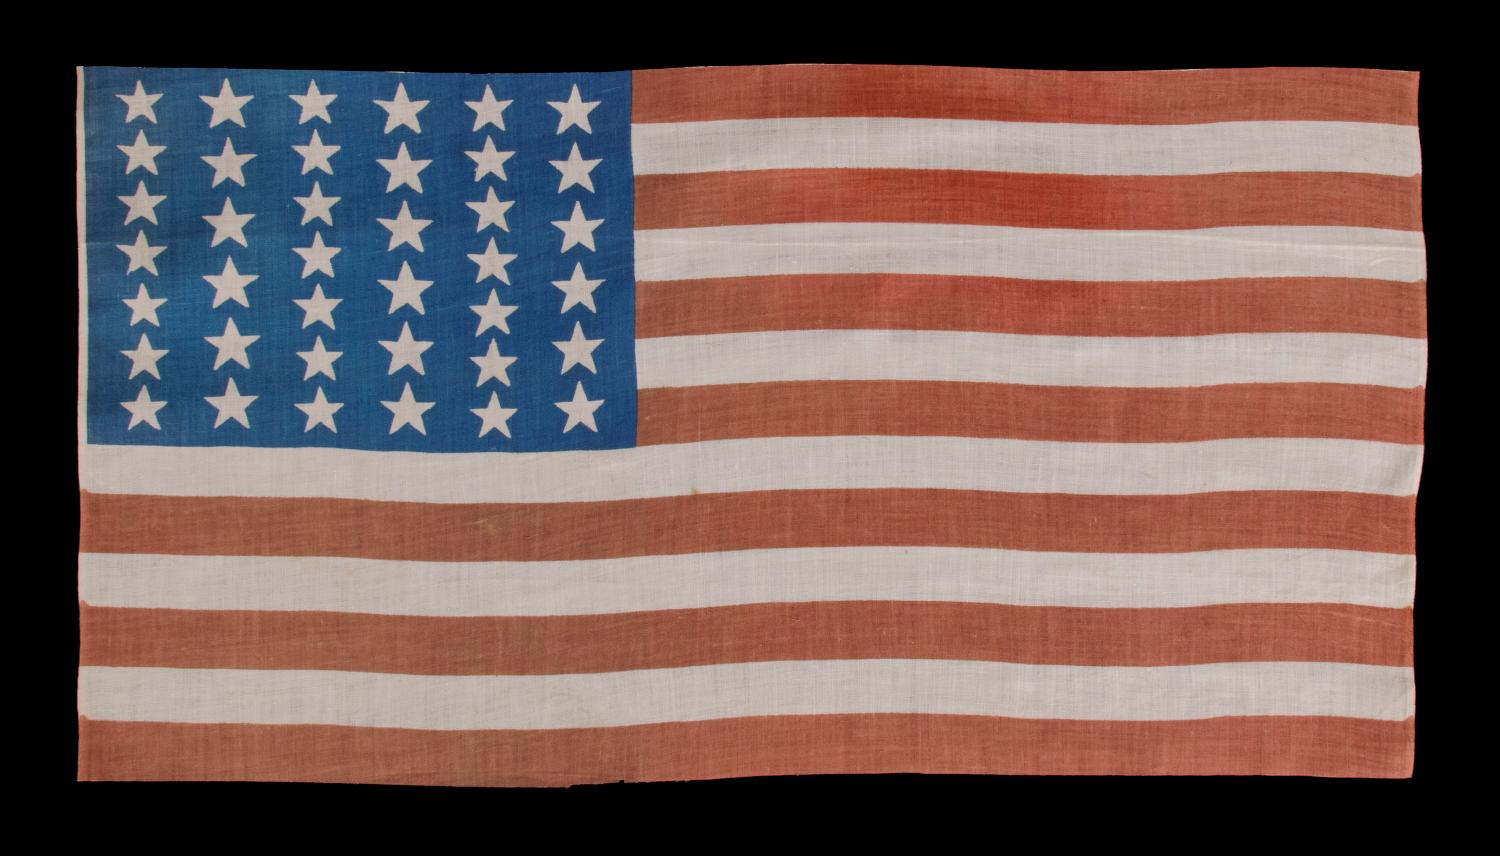 39 STARS IN TWO SIZES, ALTERNATING FROM ONE COLUMN TO THE NEXT, ON AN ANTIQUE AMERICAN PARADE FLAG WITH AN UNUSUALLY ELONGATED PROFILE, DATING TO THE 1876 CENTENNIAL, NEVER AN OFFICIAL STAR COUNT, REFLECTS THE ANTICIPATED ARRIVAL OF COLORADO AND THE